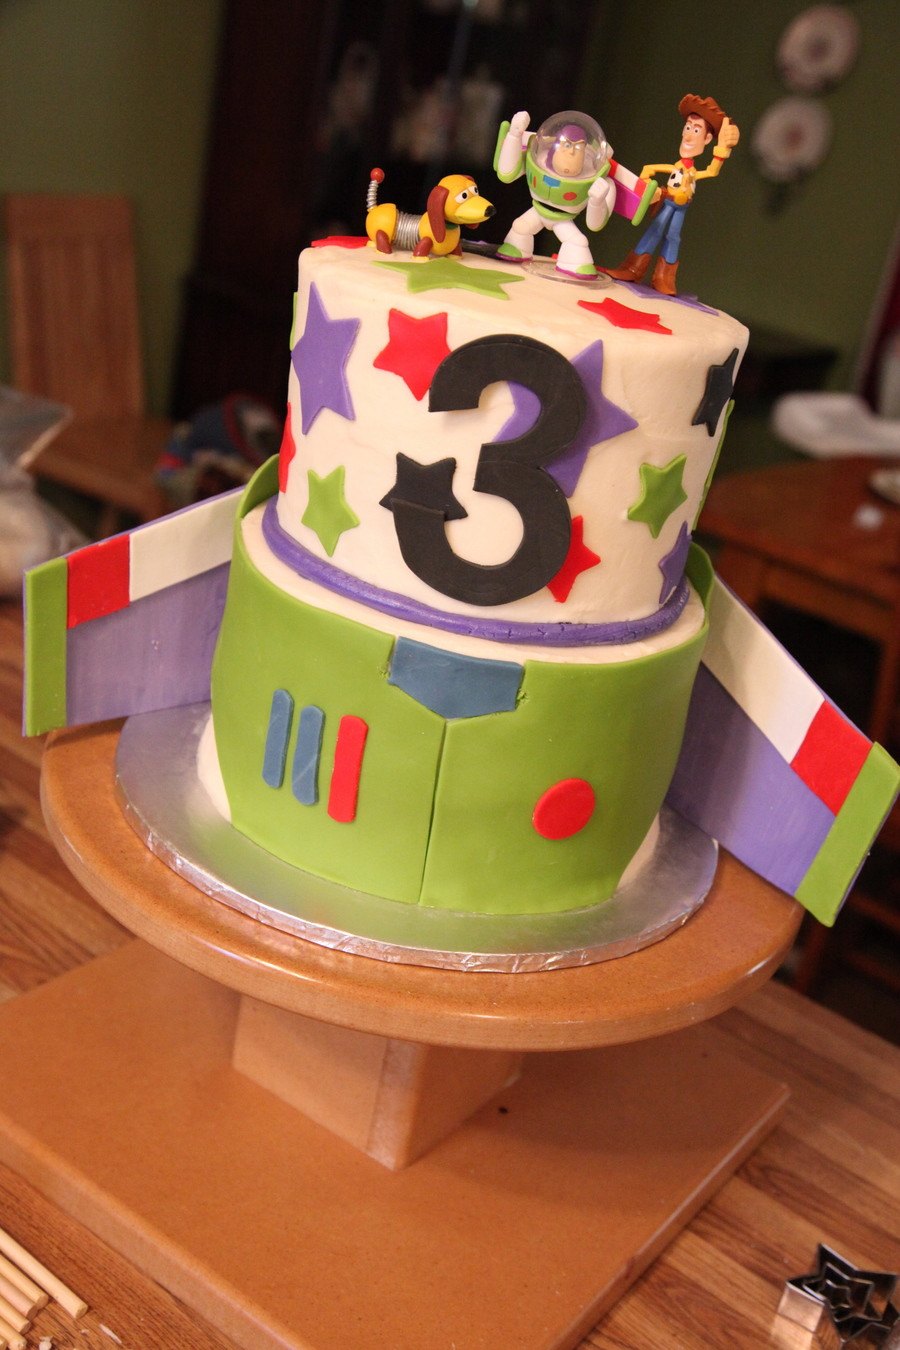 3 Year Old Birthday Cake
 Toy Story Cake For A 3 Year Old Little Boy Chocolate Cake